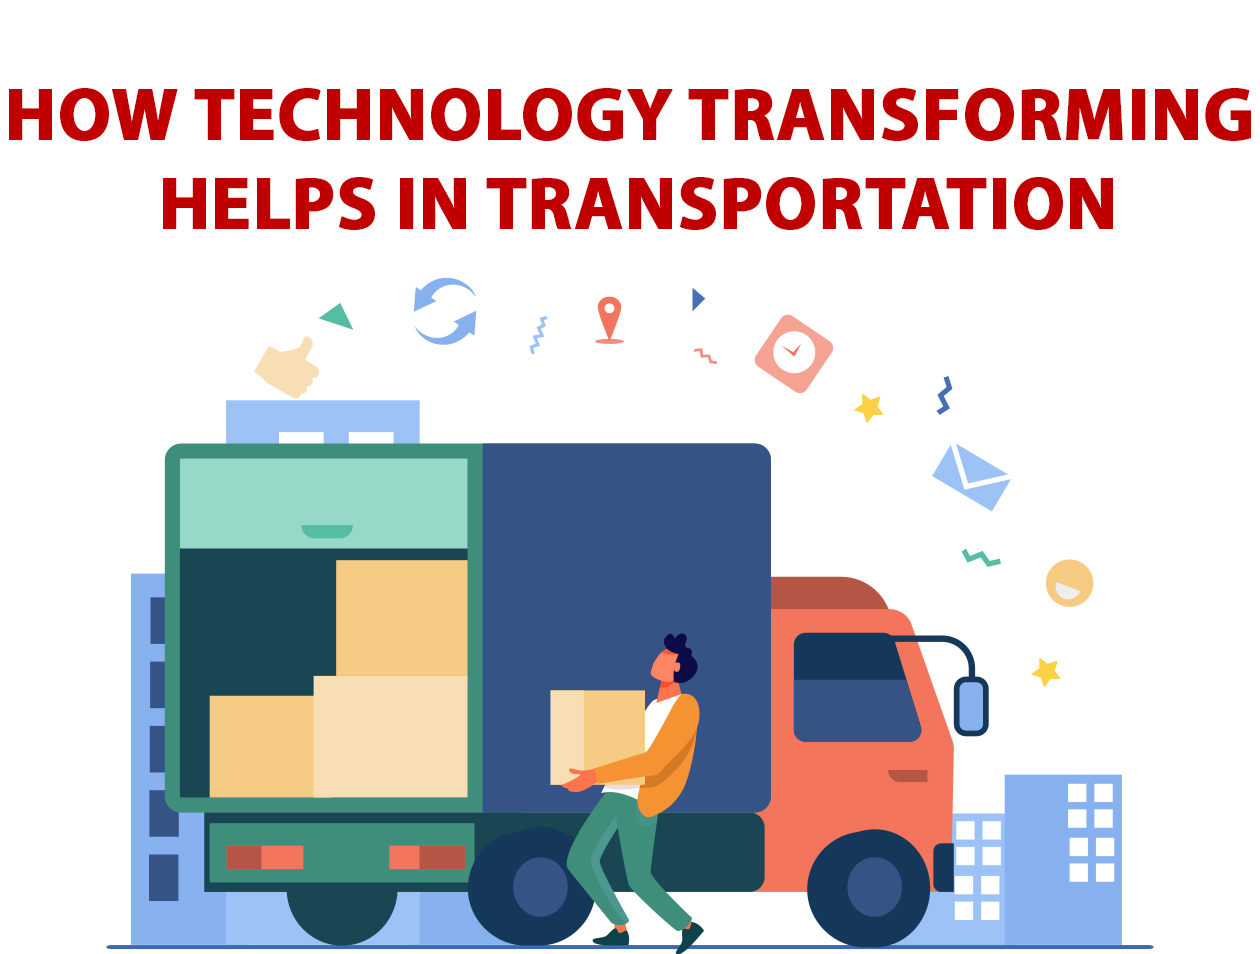 How Technology Transforming helps in Transportation